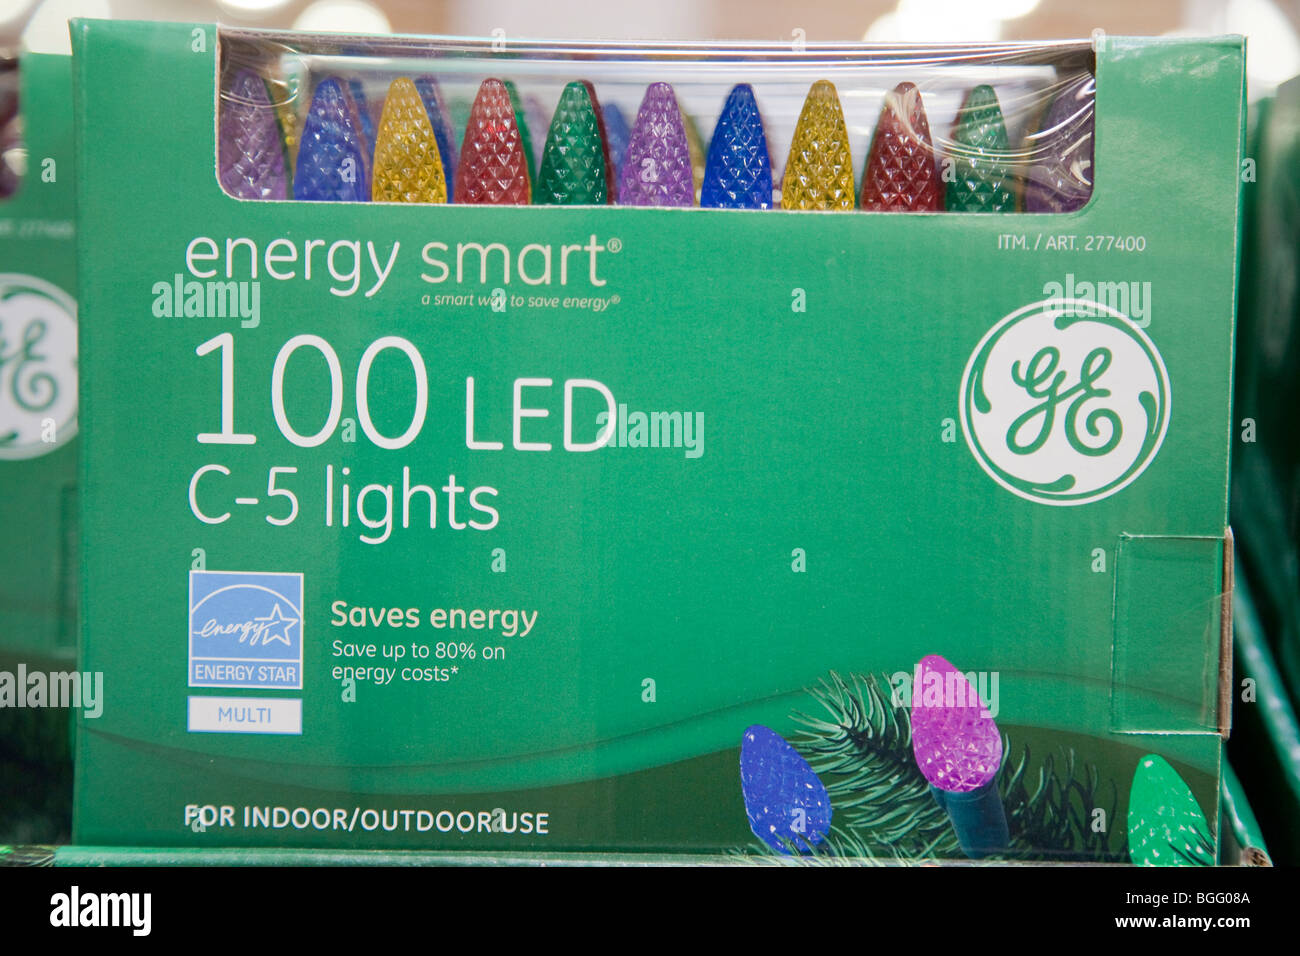 Close up of sustainable holiday lights in store. General Electric brand 'Energy Smart' energy efficient LED holiday lights. Stock Photo